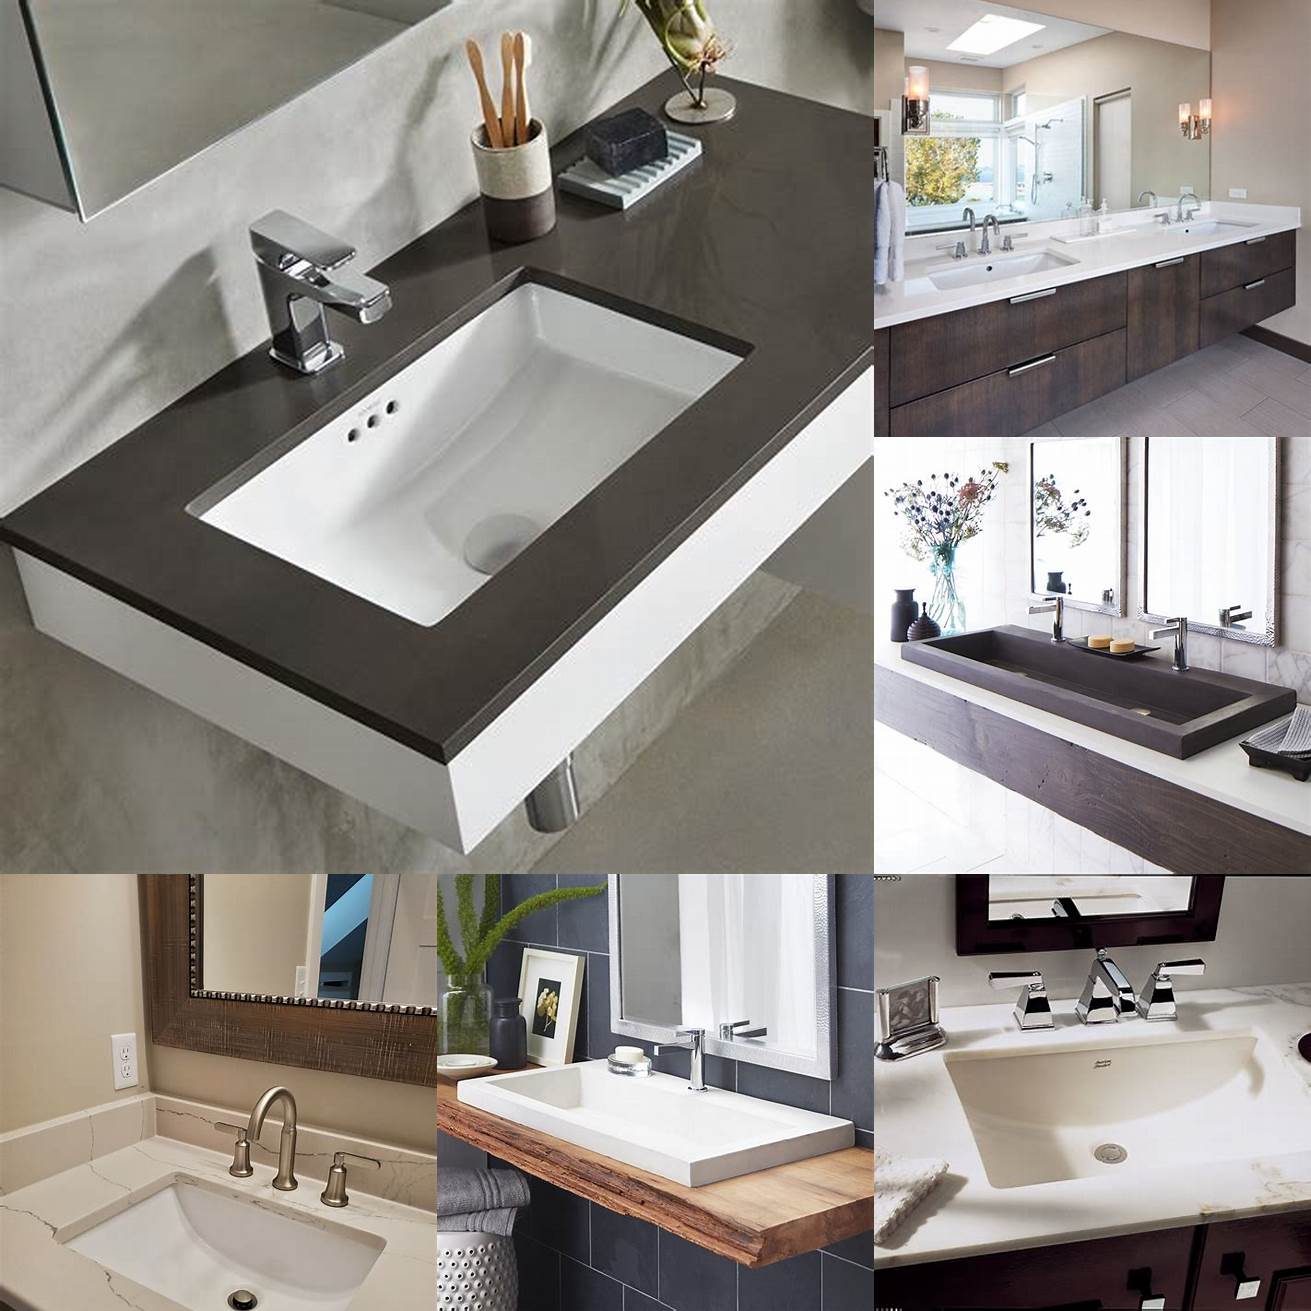 Image of a modern bathroom with an undermount sink